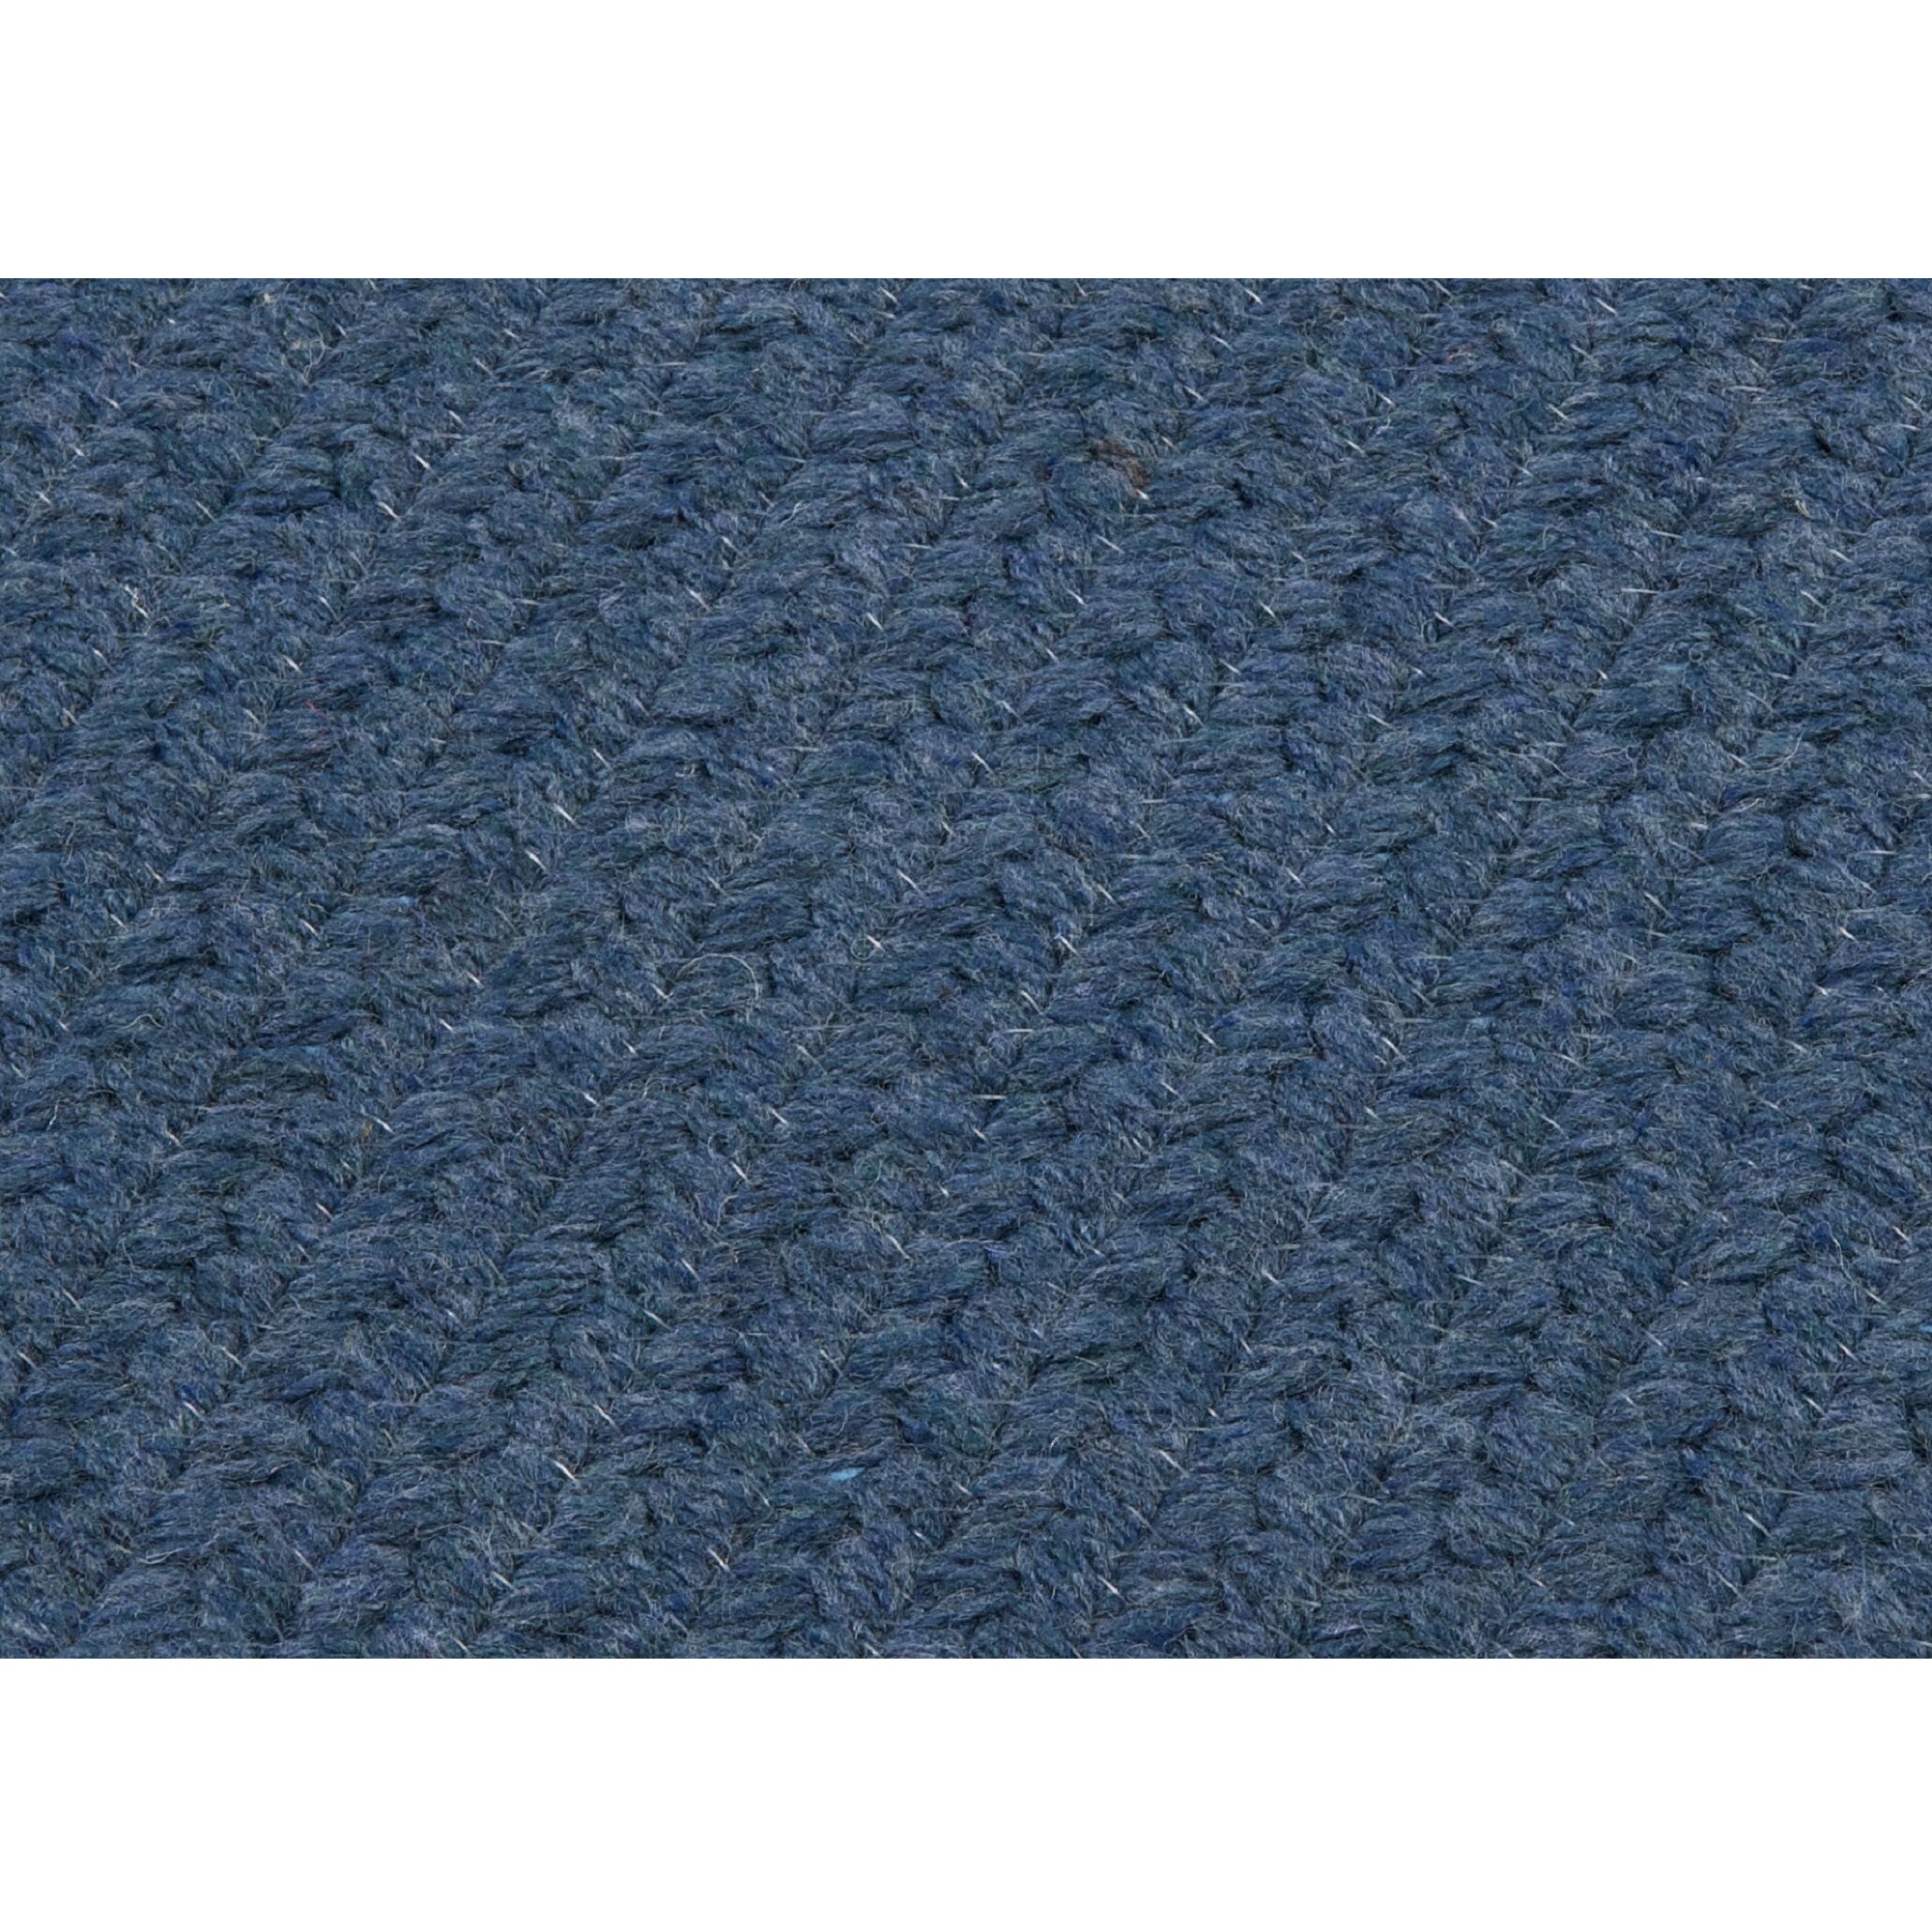 Colonial Mills 11' Federal Blue Handmade Braided Reversible Square Area Throw Rug - image 2 of 2